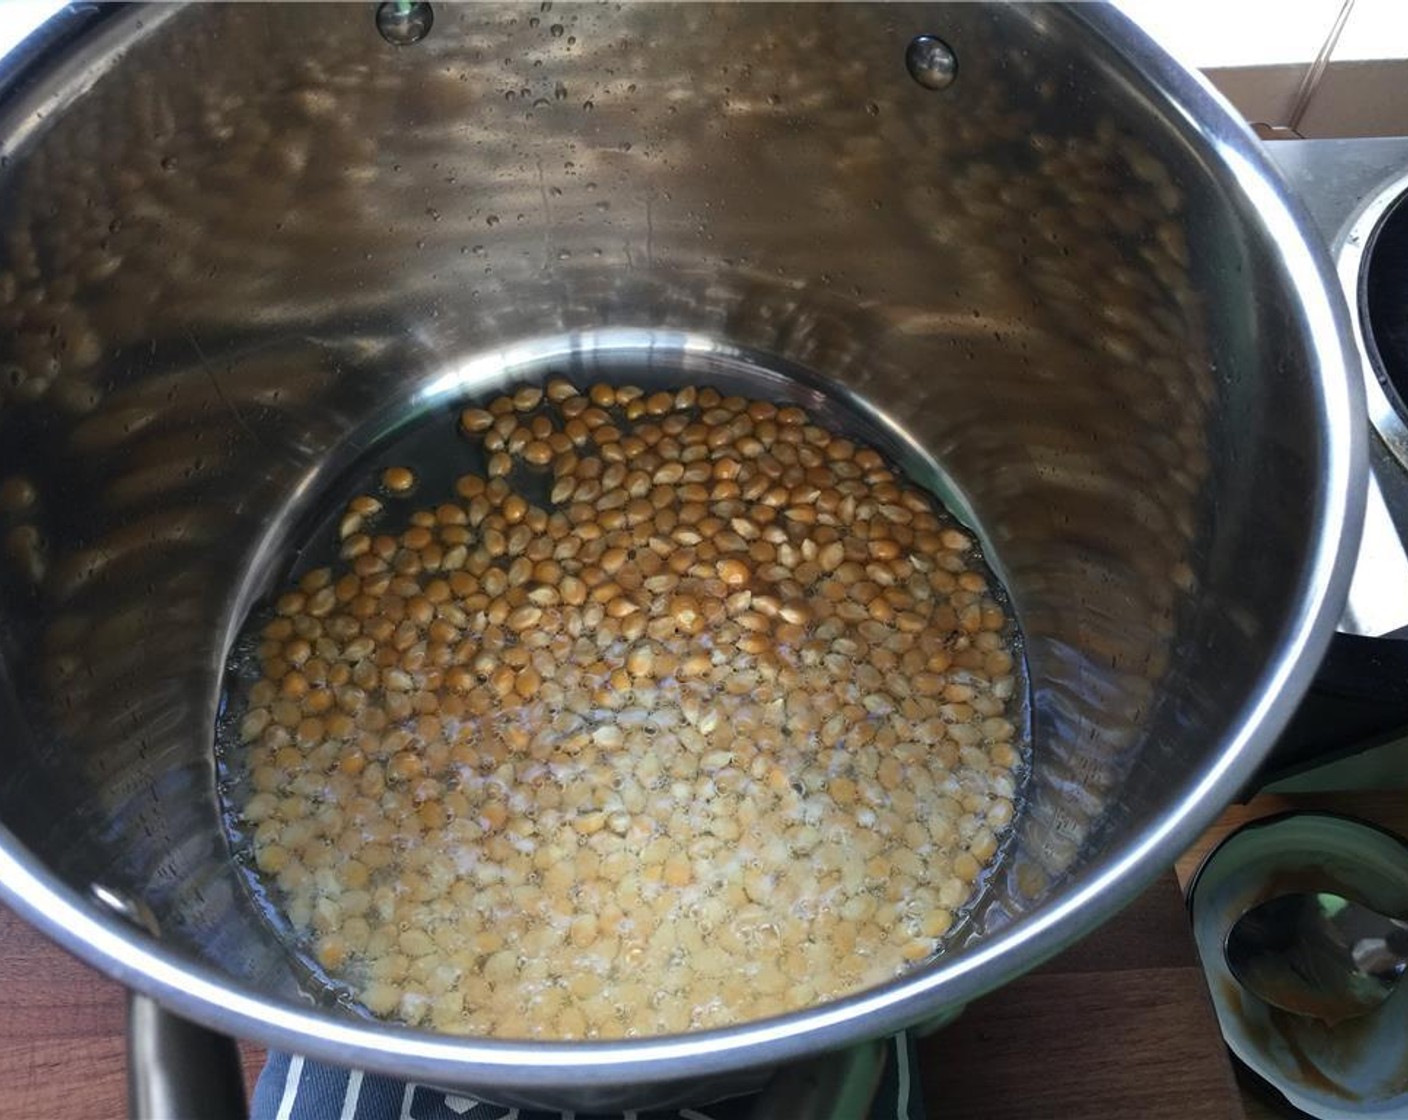 step 2 Count to 30 seconds before adding the remaining Popcorn Kernels (1/2 cup). Carefully toss them around so they are coated in the oil. Cover and place back over medium heat.